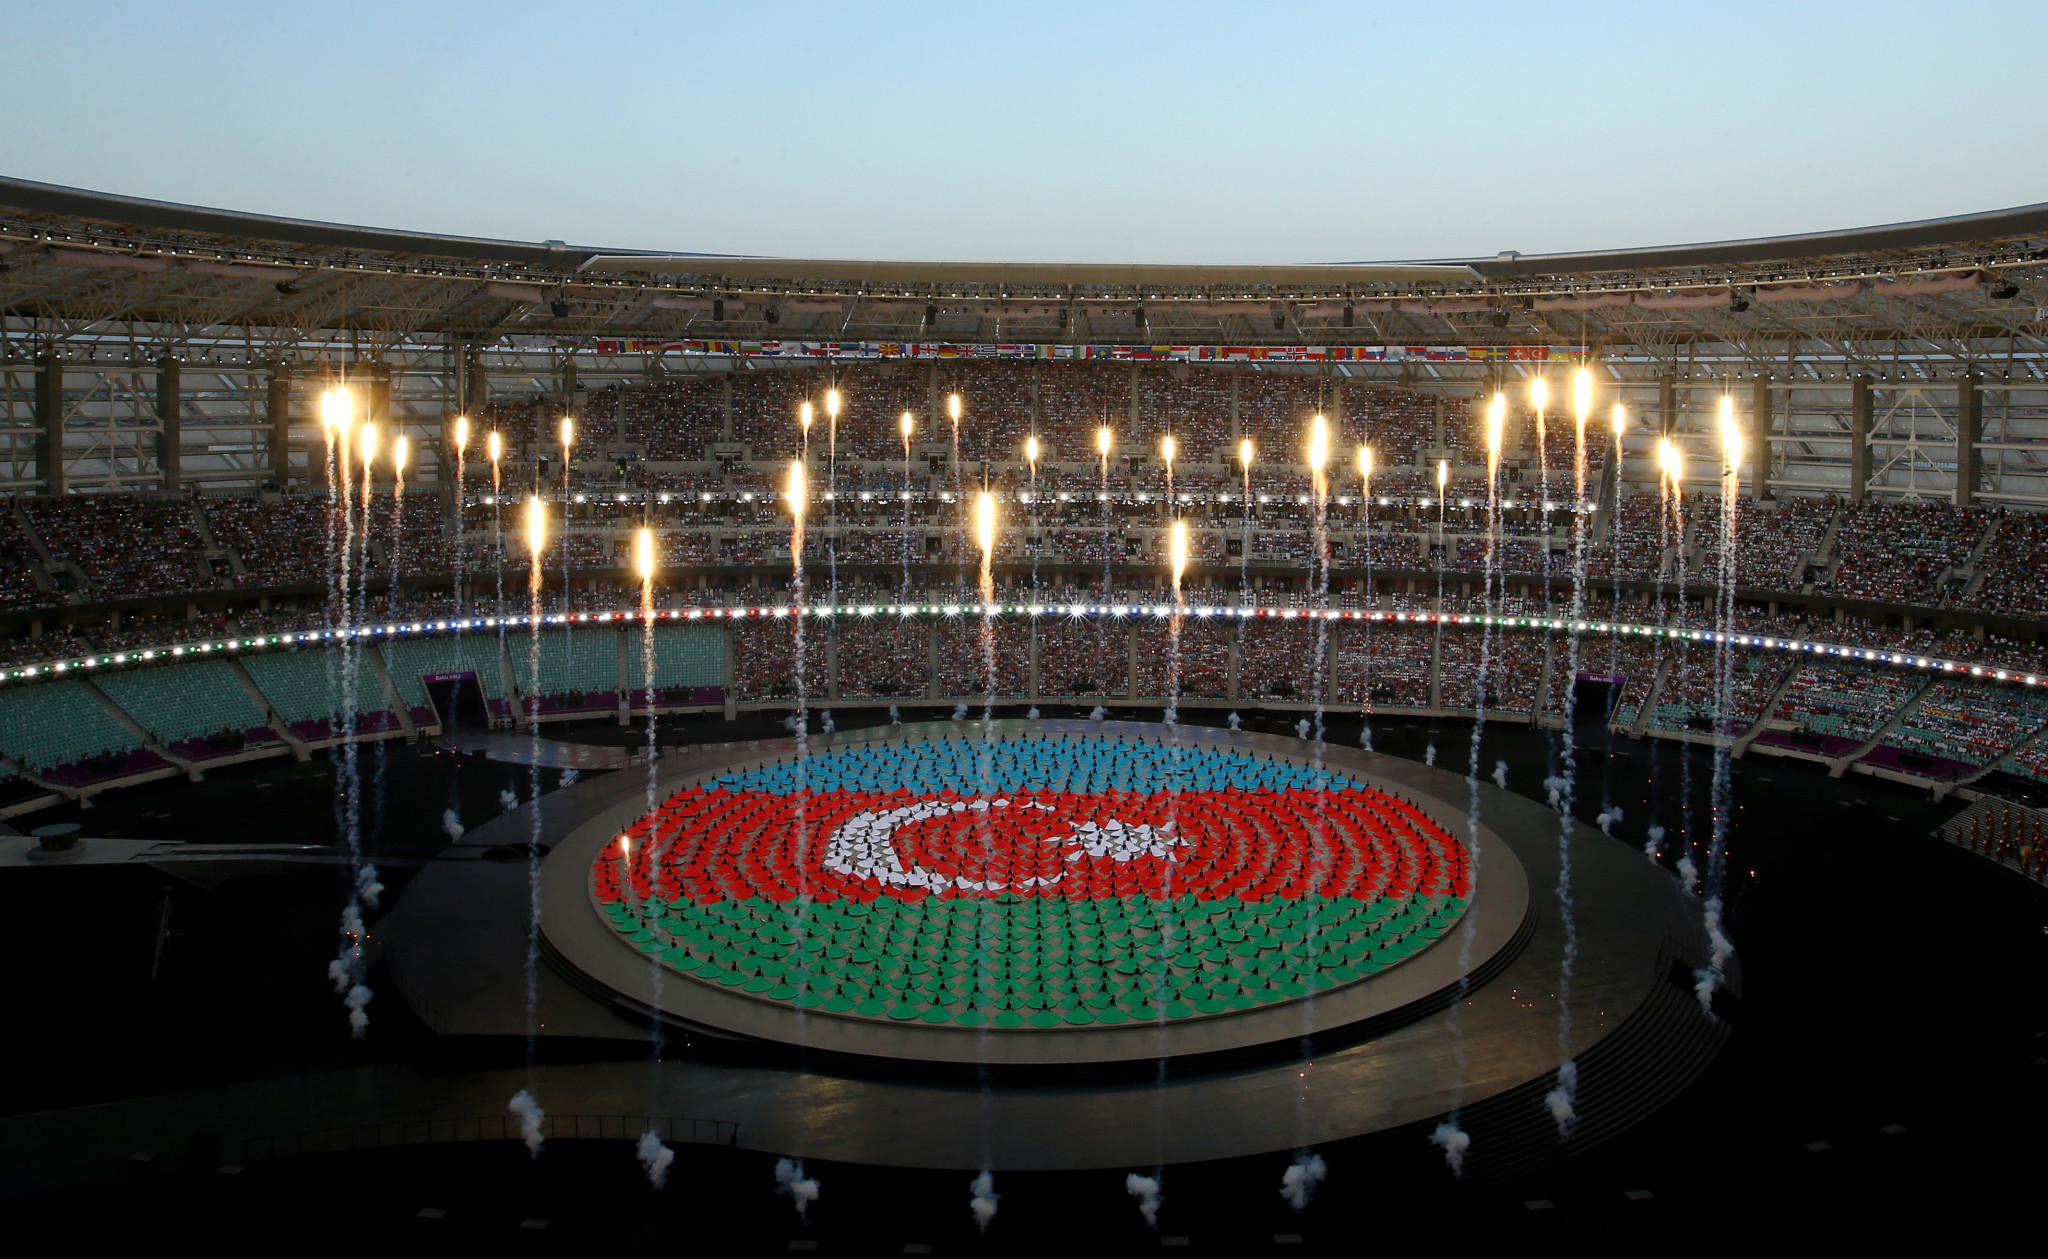 The Baku 2015 European Games has proved a catalyst for further sports events in Azerbaijan's capital ©Getty Images